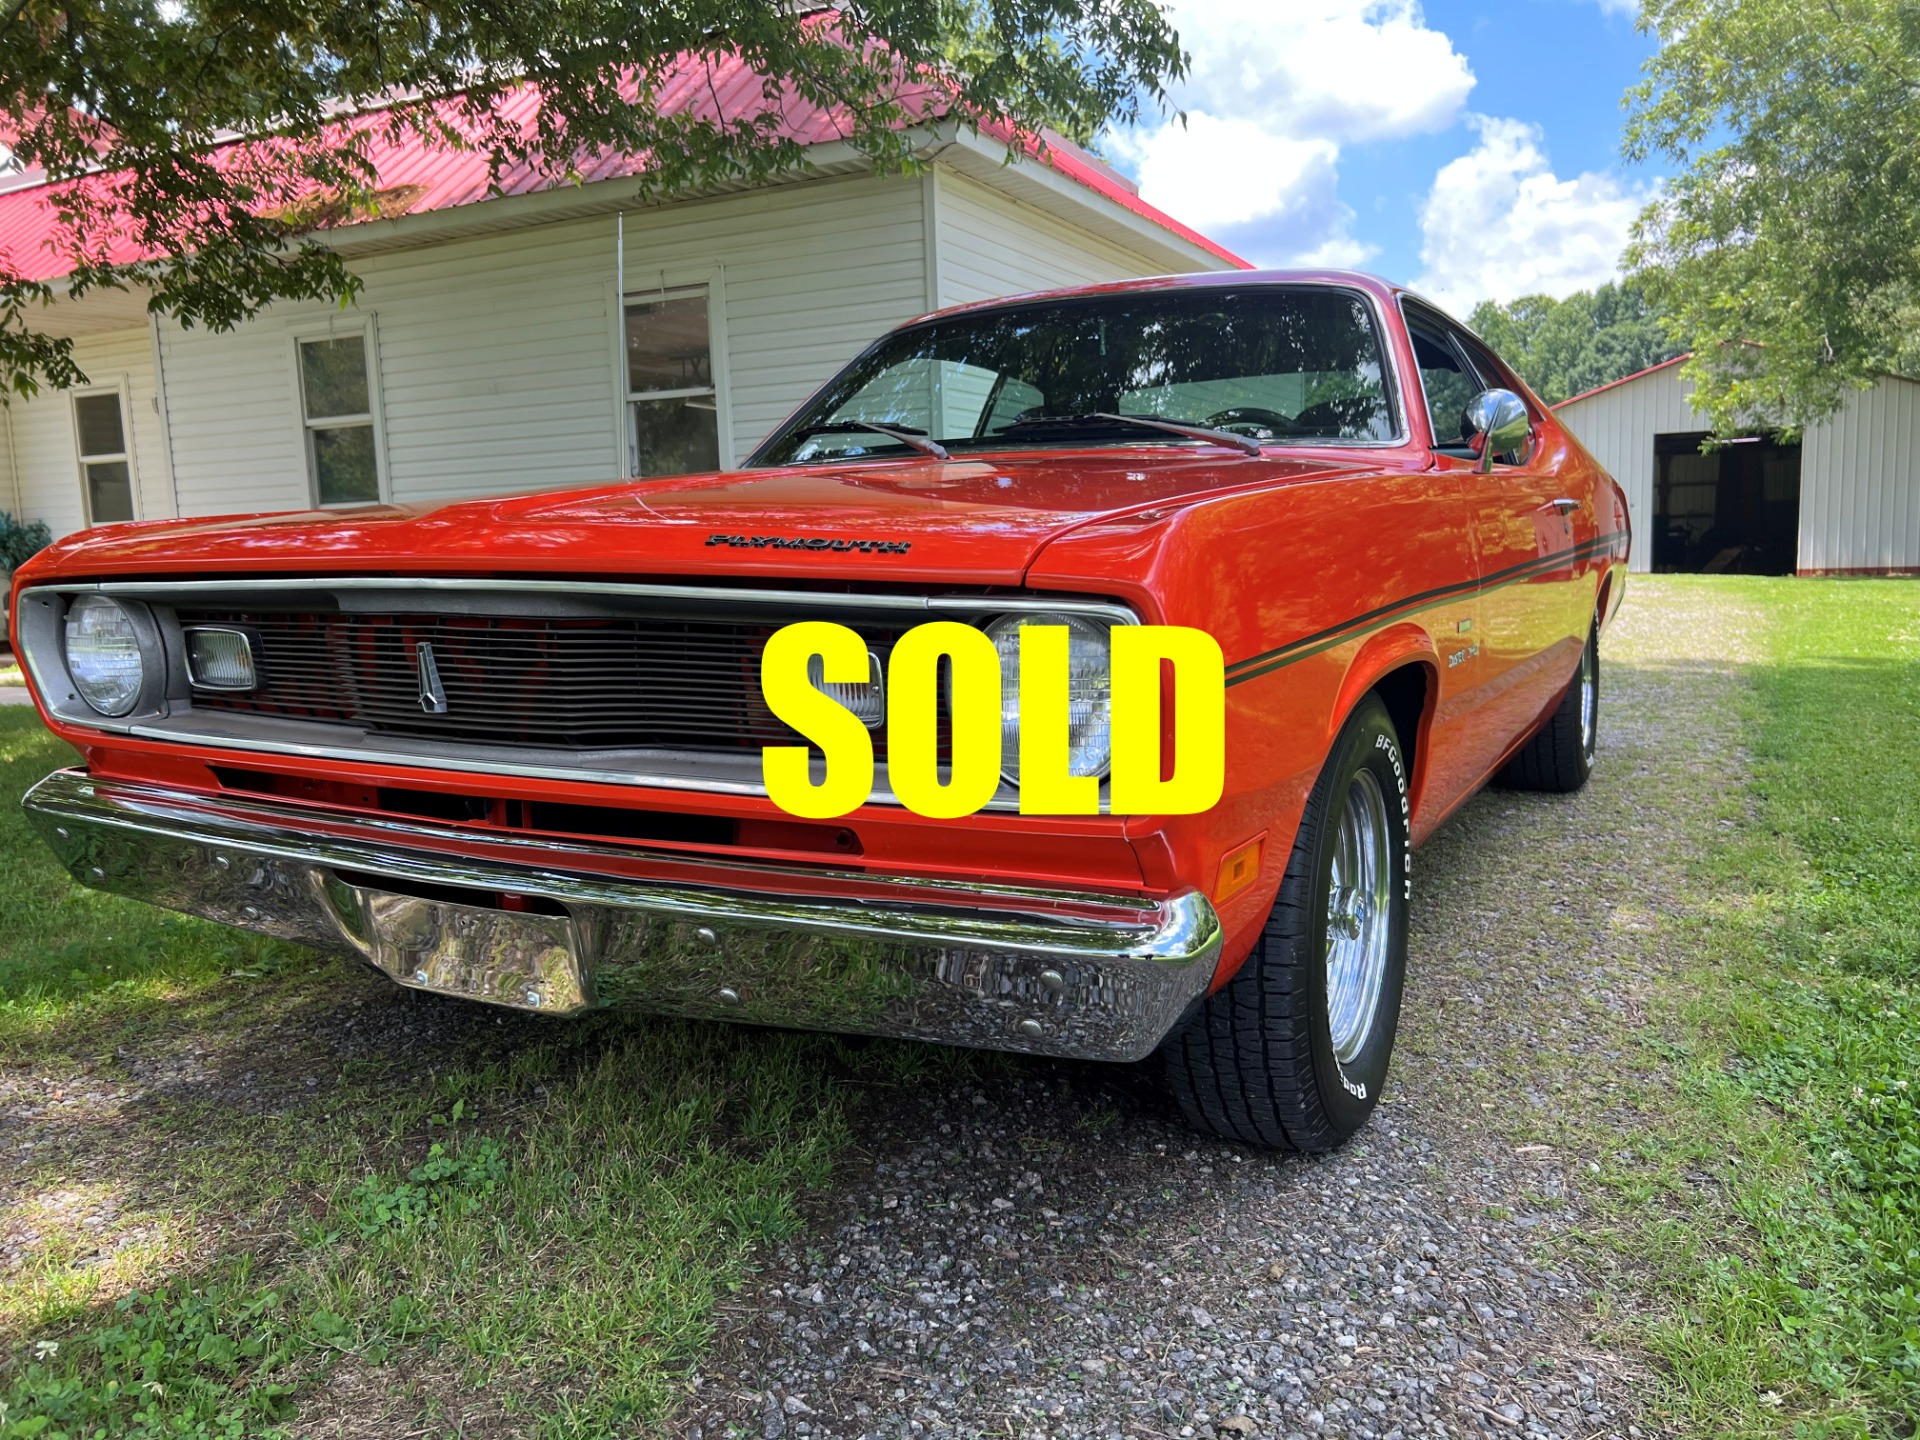 Used 1970 Plymouth Valiant Duster  249 , For Sale $44500, Call Us: (704) 996-3735